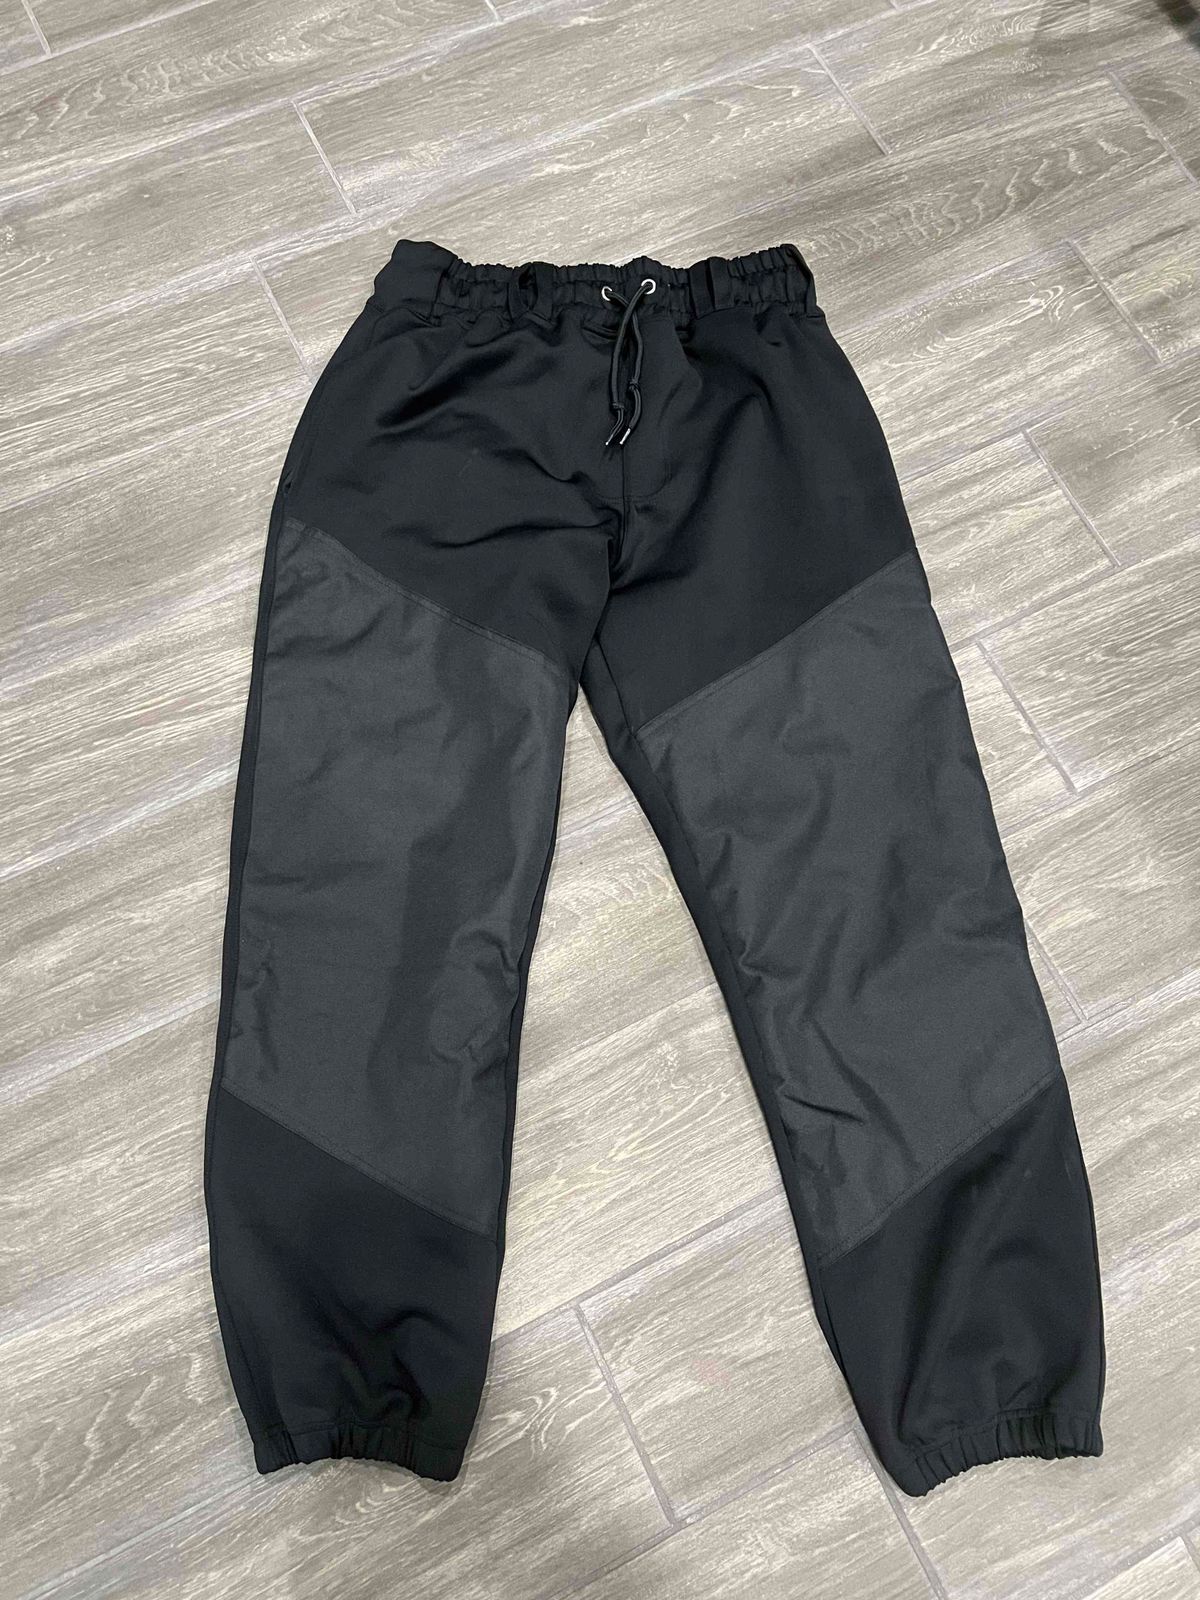 Ruthless Joggers Large Brand New